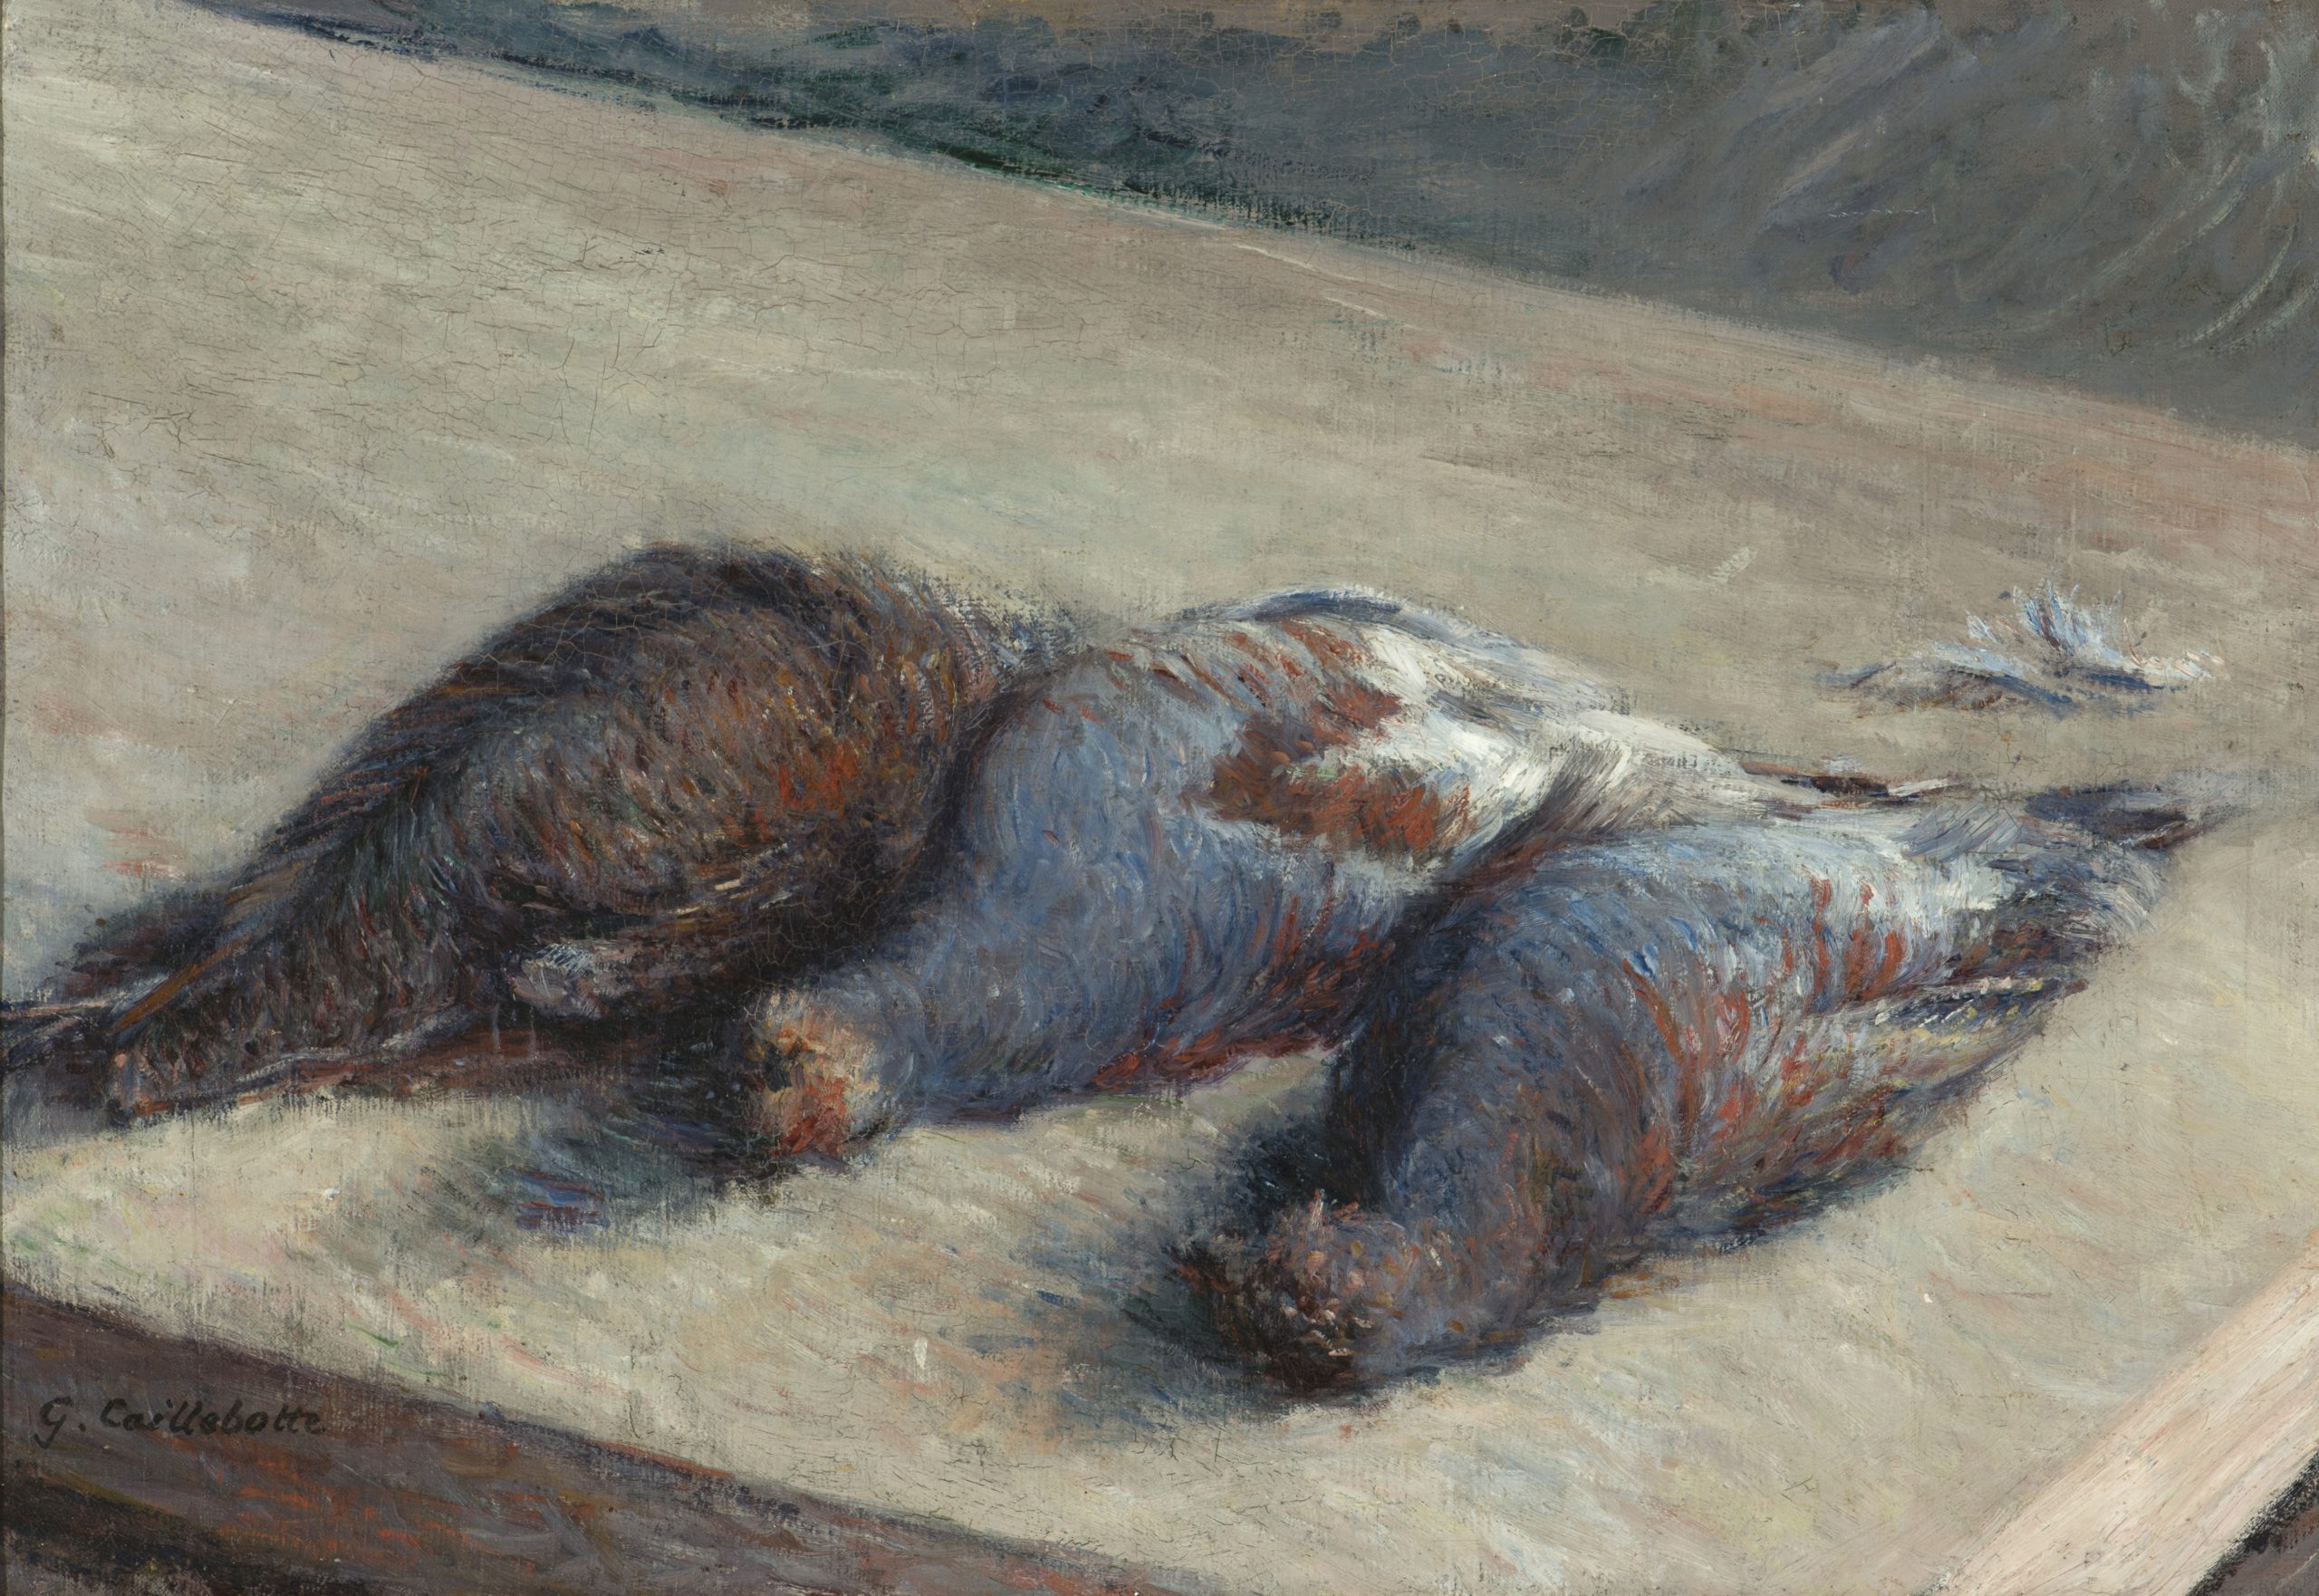 Three dead partridges lay on a table near to the edge of a table. The painting is notably cropped to focus on the birds.